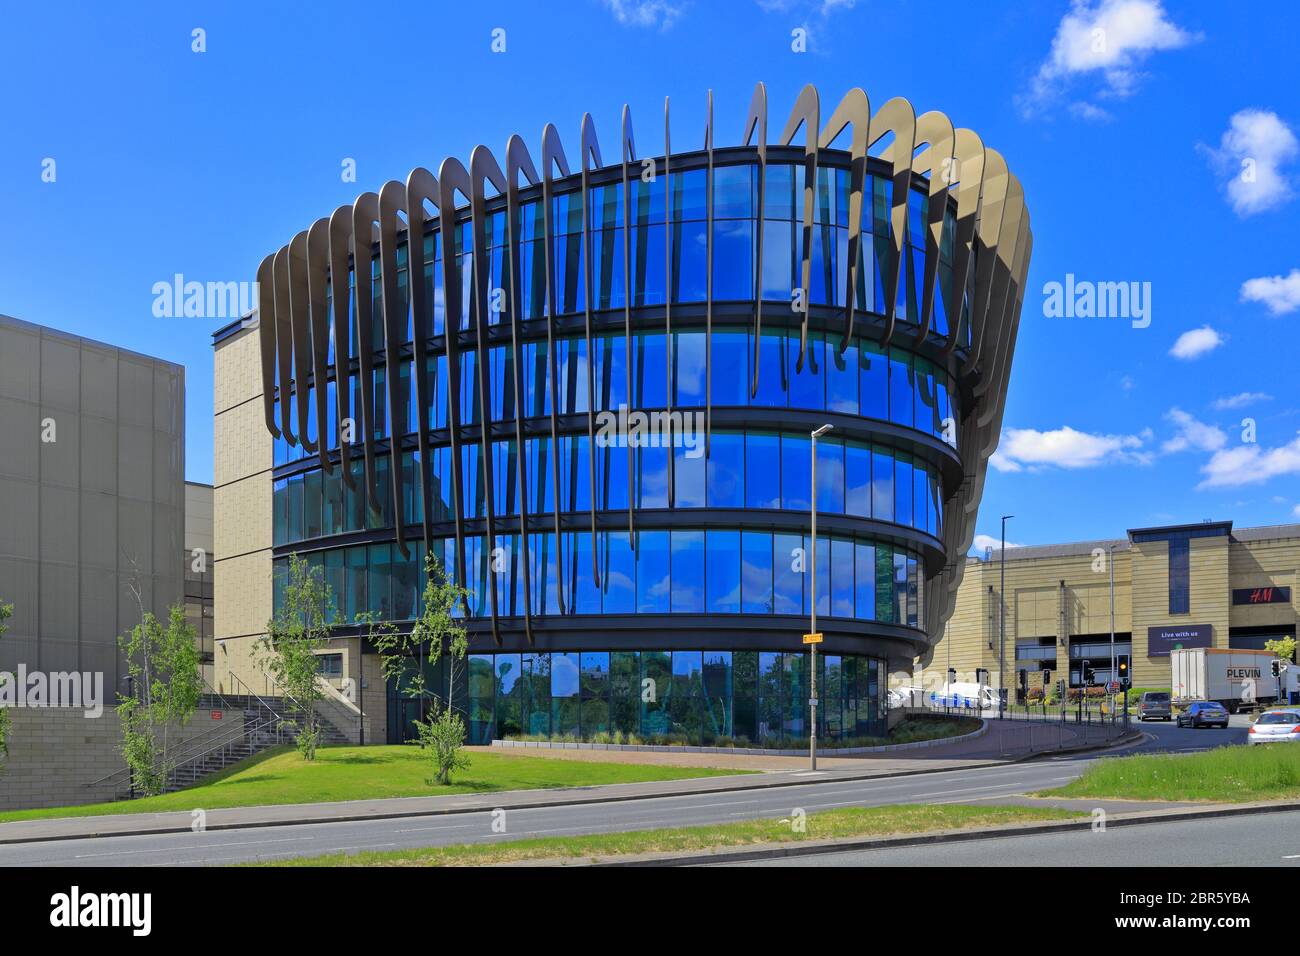 Oastler Building abritant Music, Humanités and Media, University of Huddersfield, Huddersfield, West Yorkshire, Angleterre, Royaume-Uni. Banque D'Images